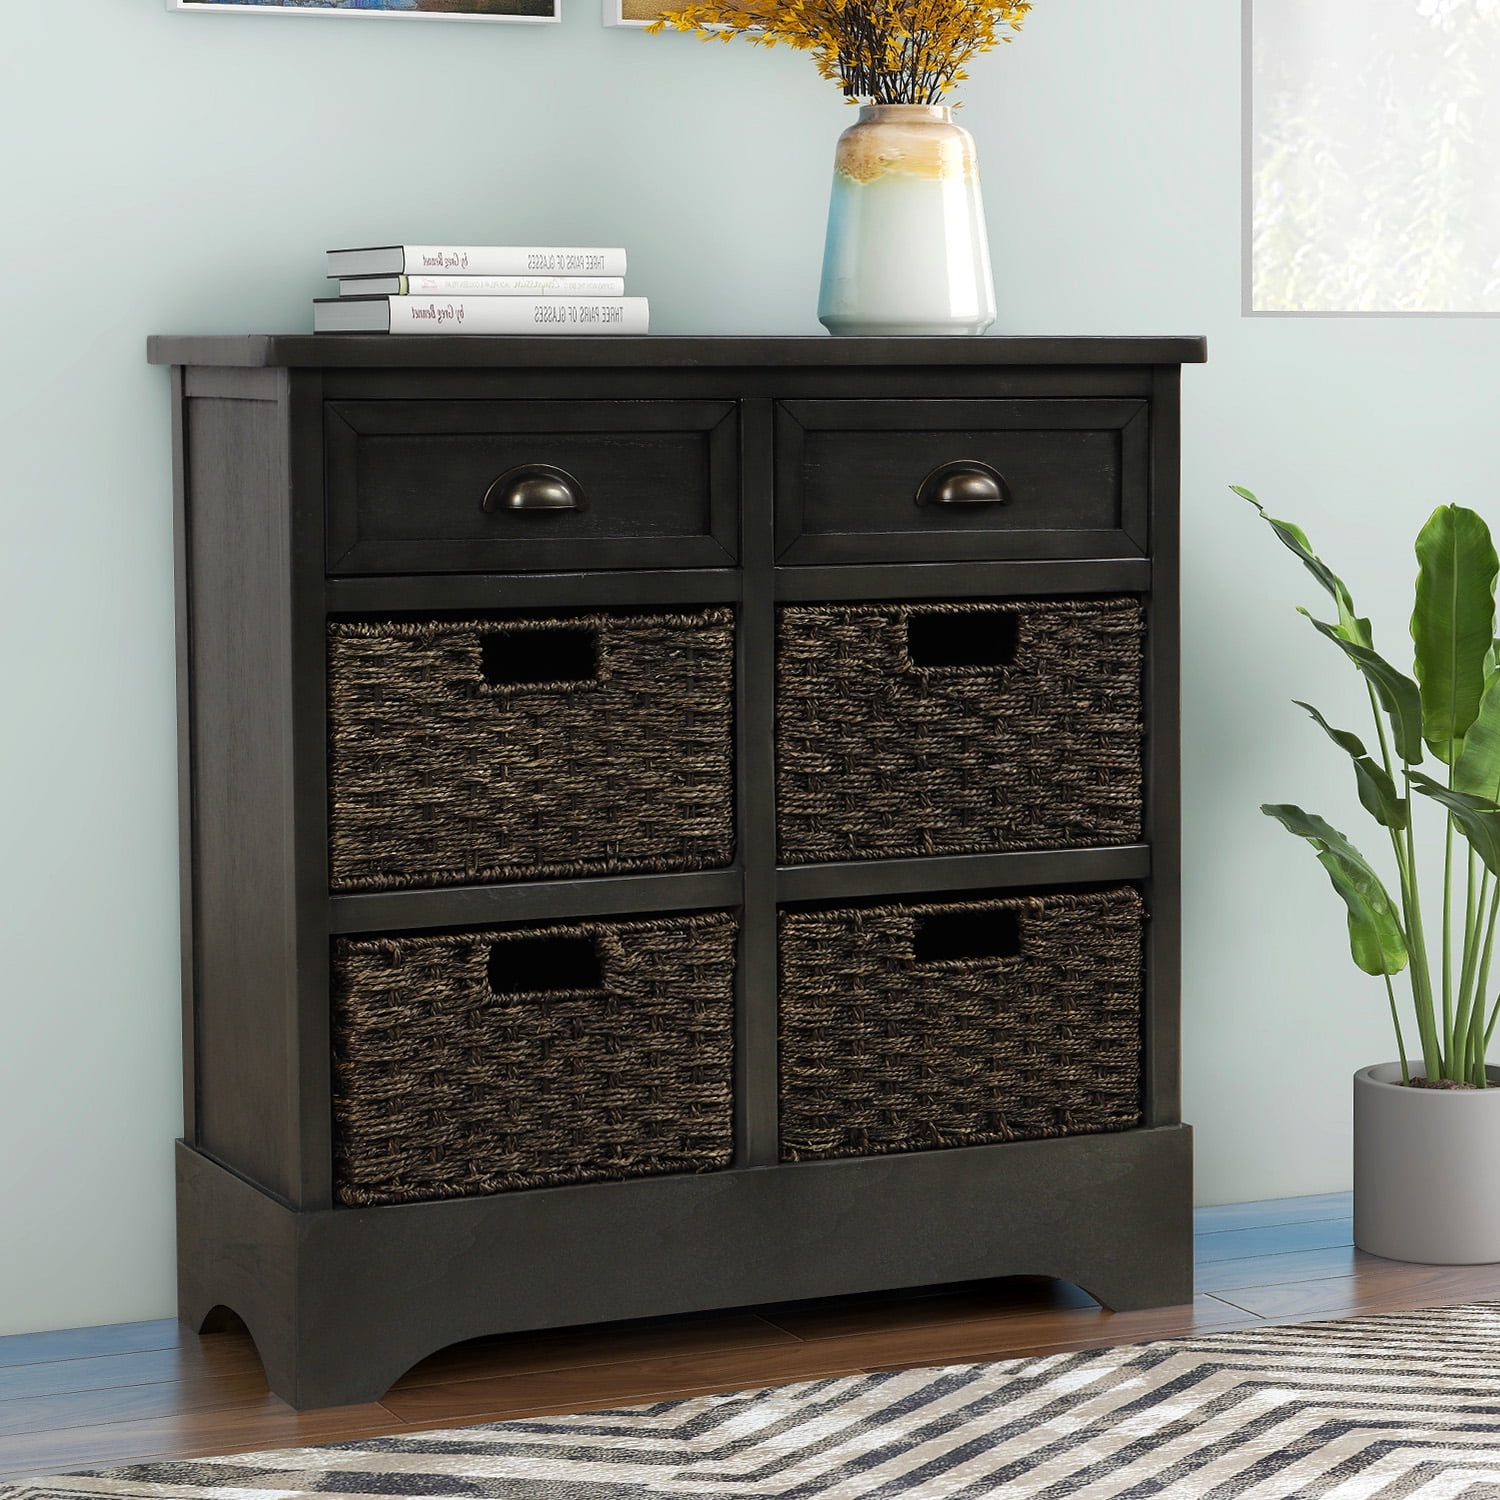 URHOMEPRO Storage Cabinet with Drawers, Modern Farmhouse Wooden